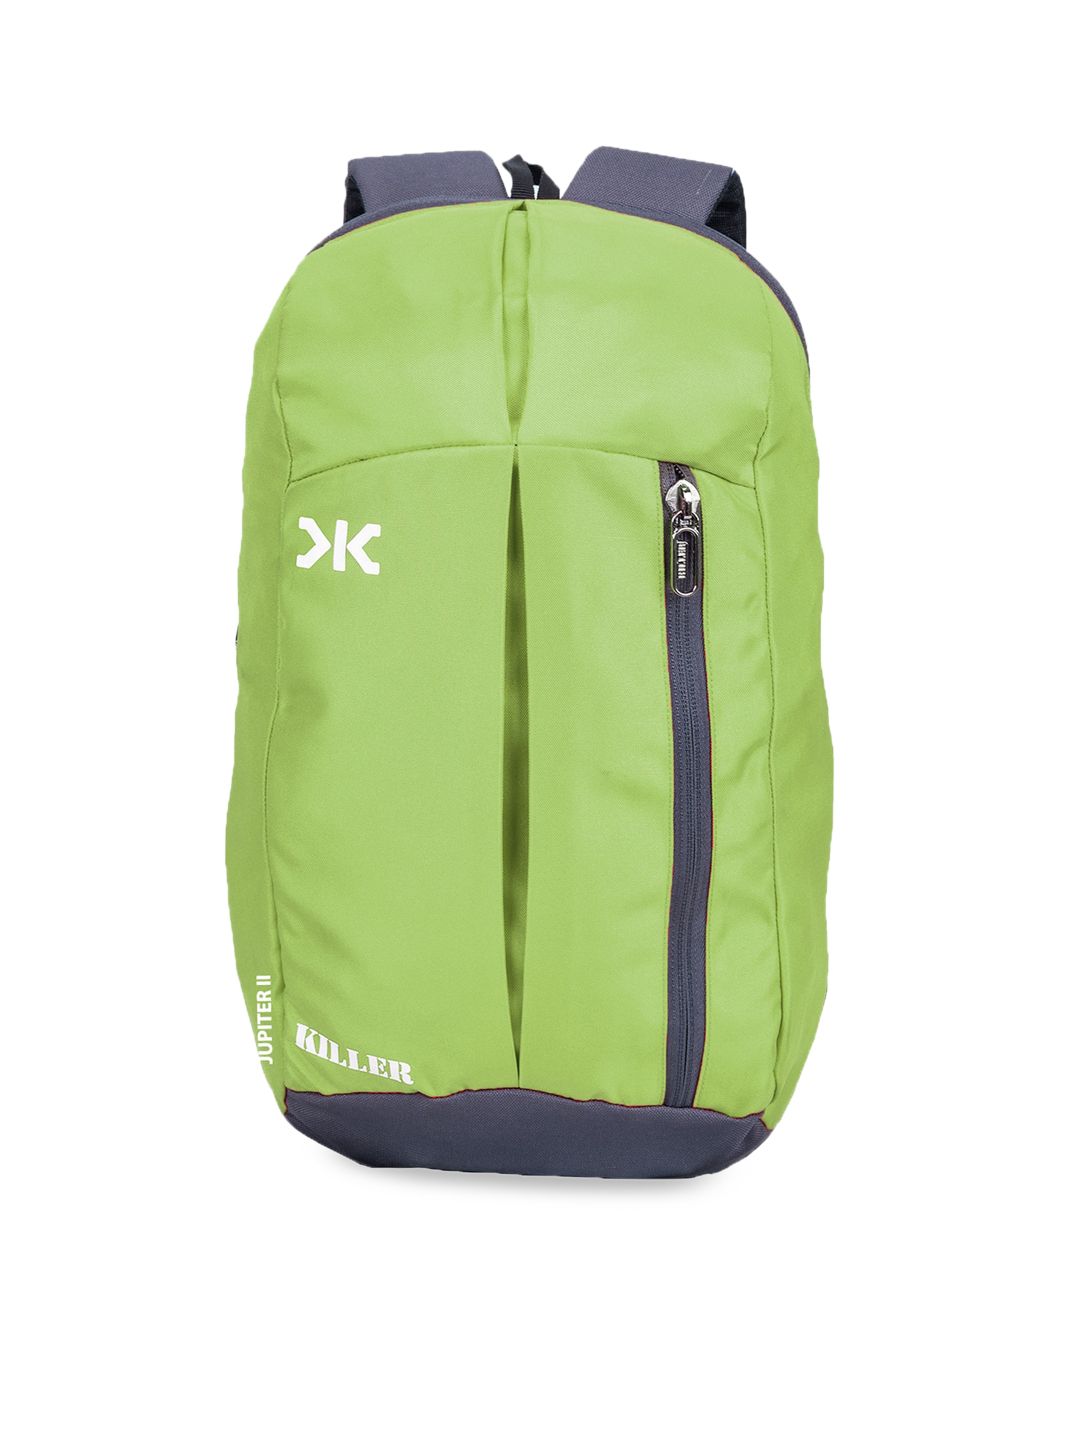 Killer Unisex Green Solid Hiking Backpack Price in India